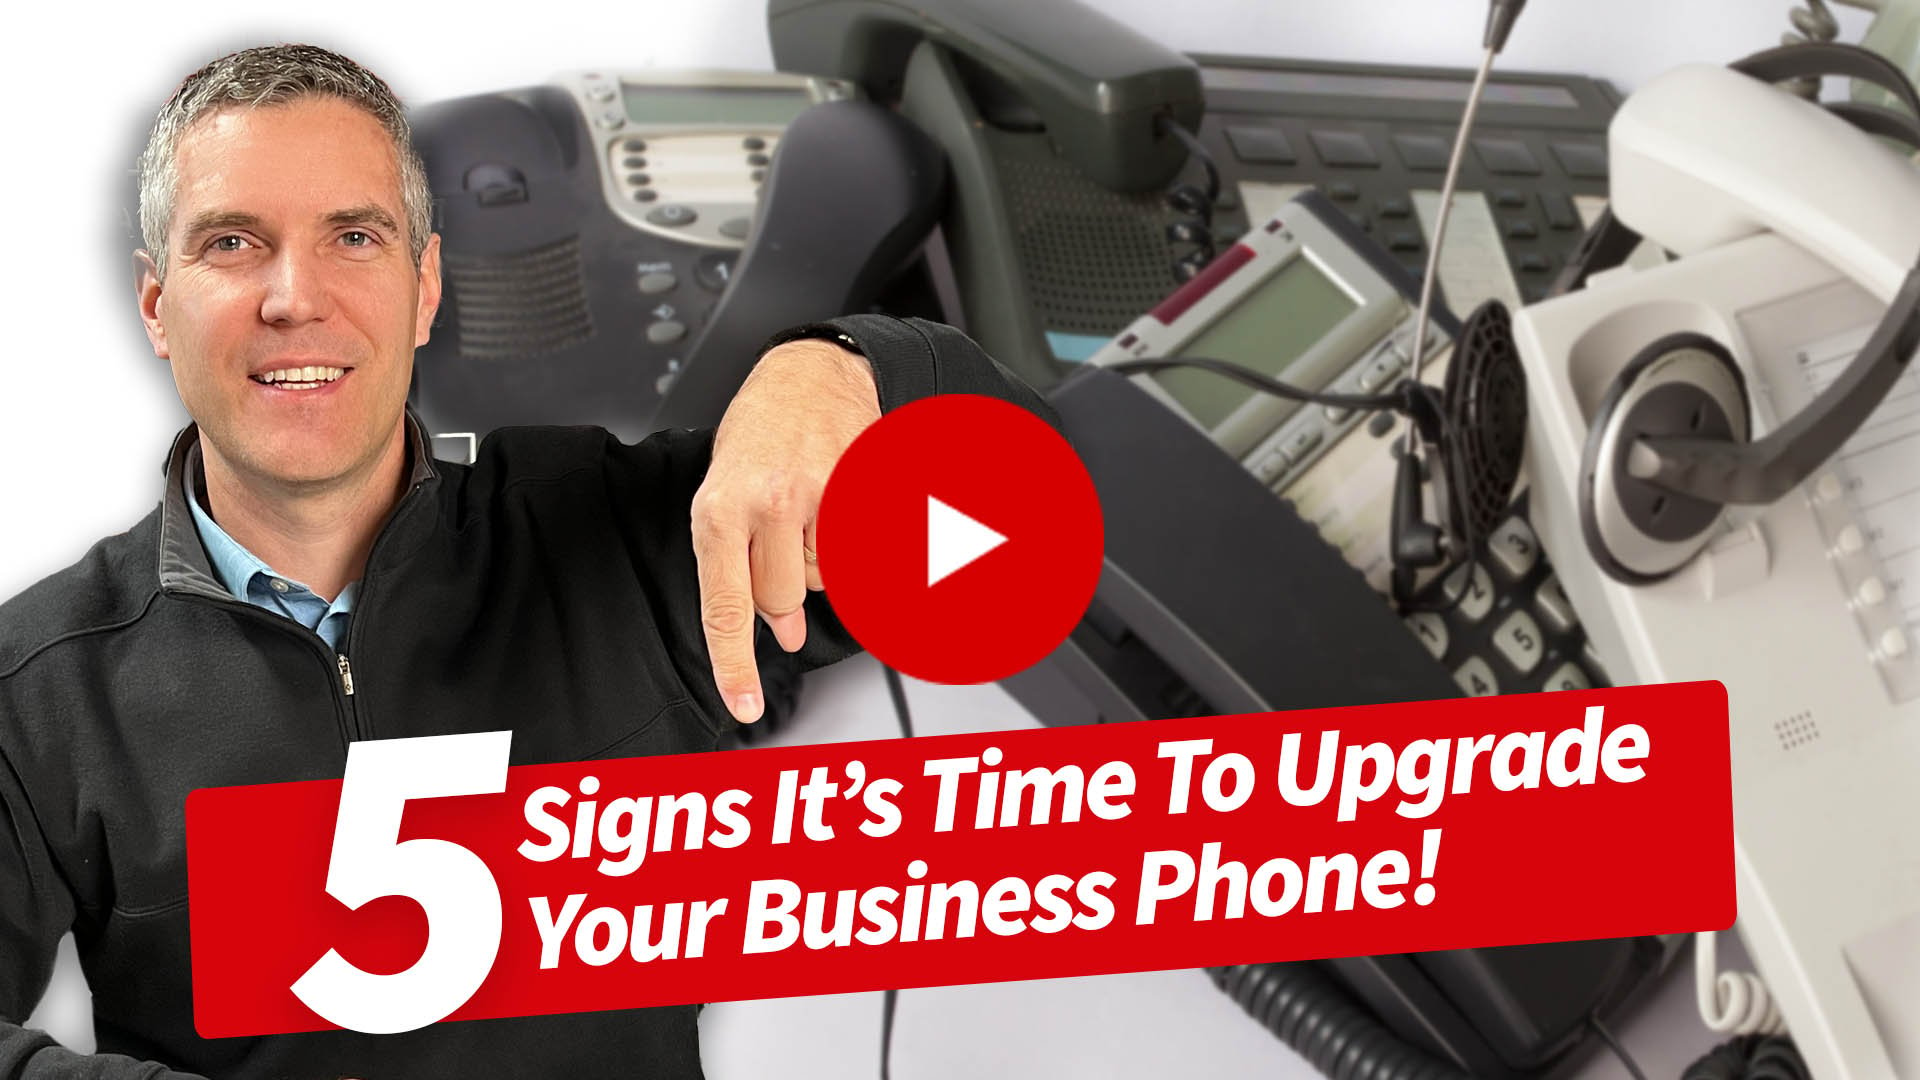 5 Signs It's Time to Upgrade Your Business Phone